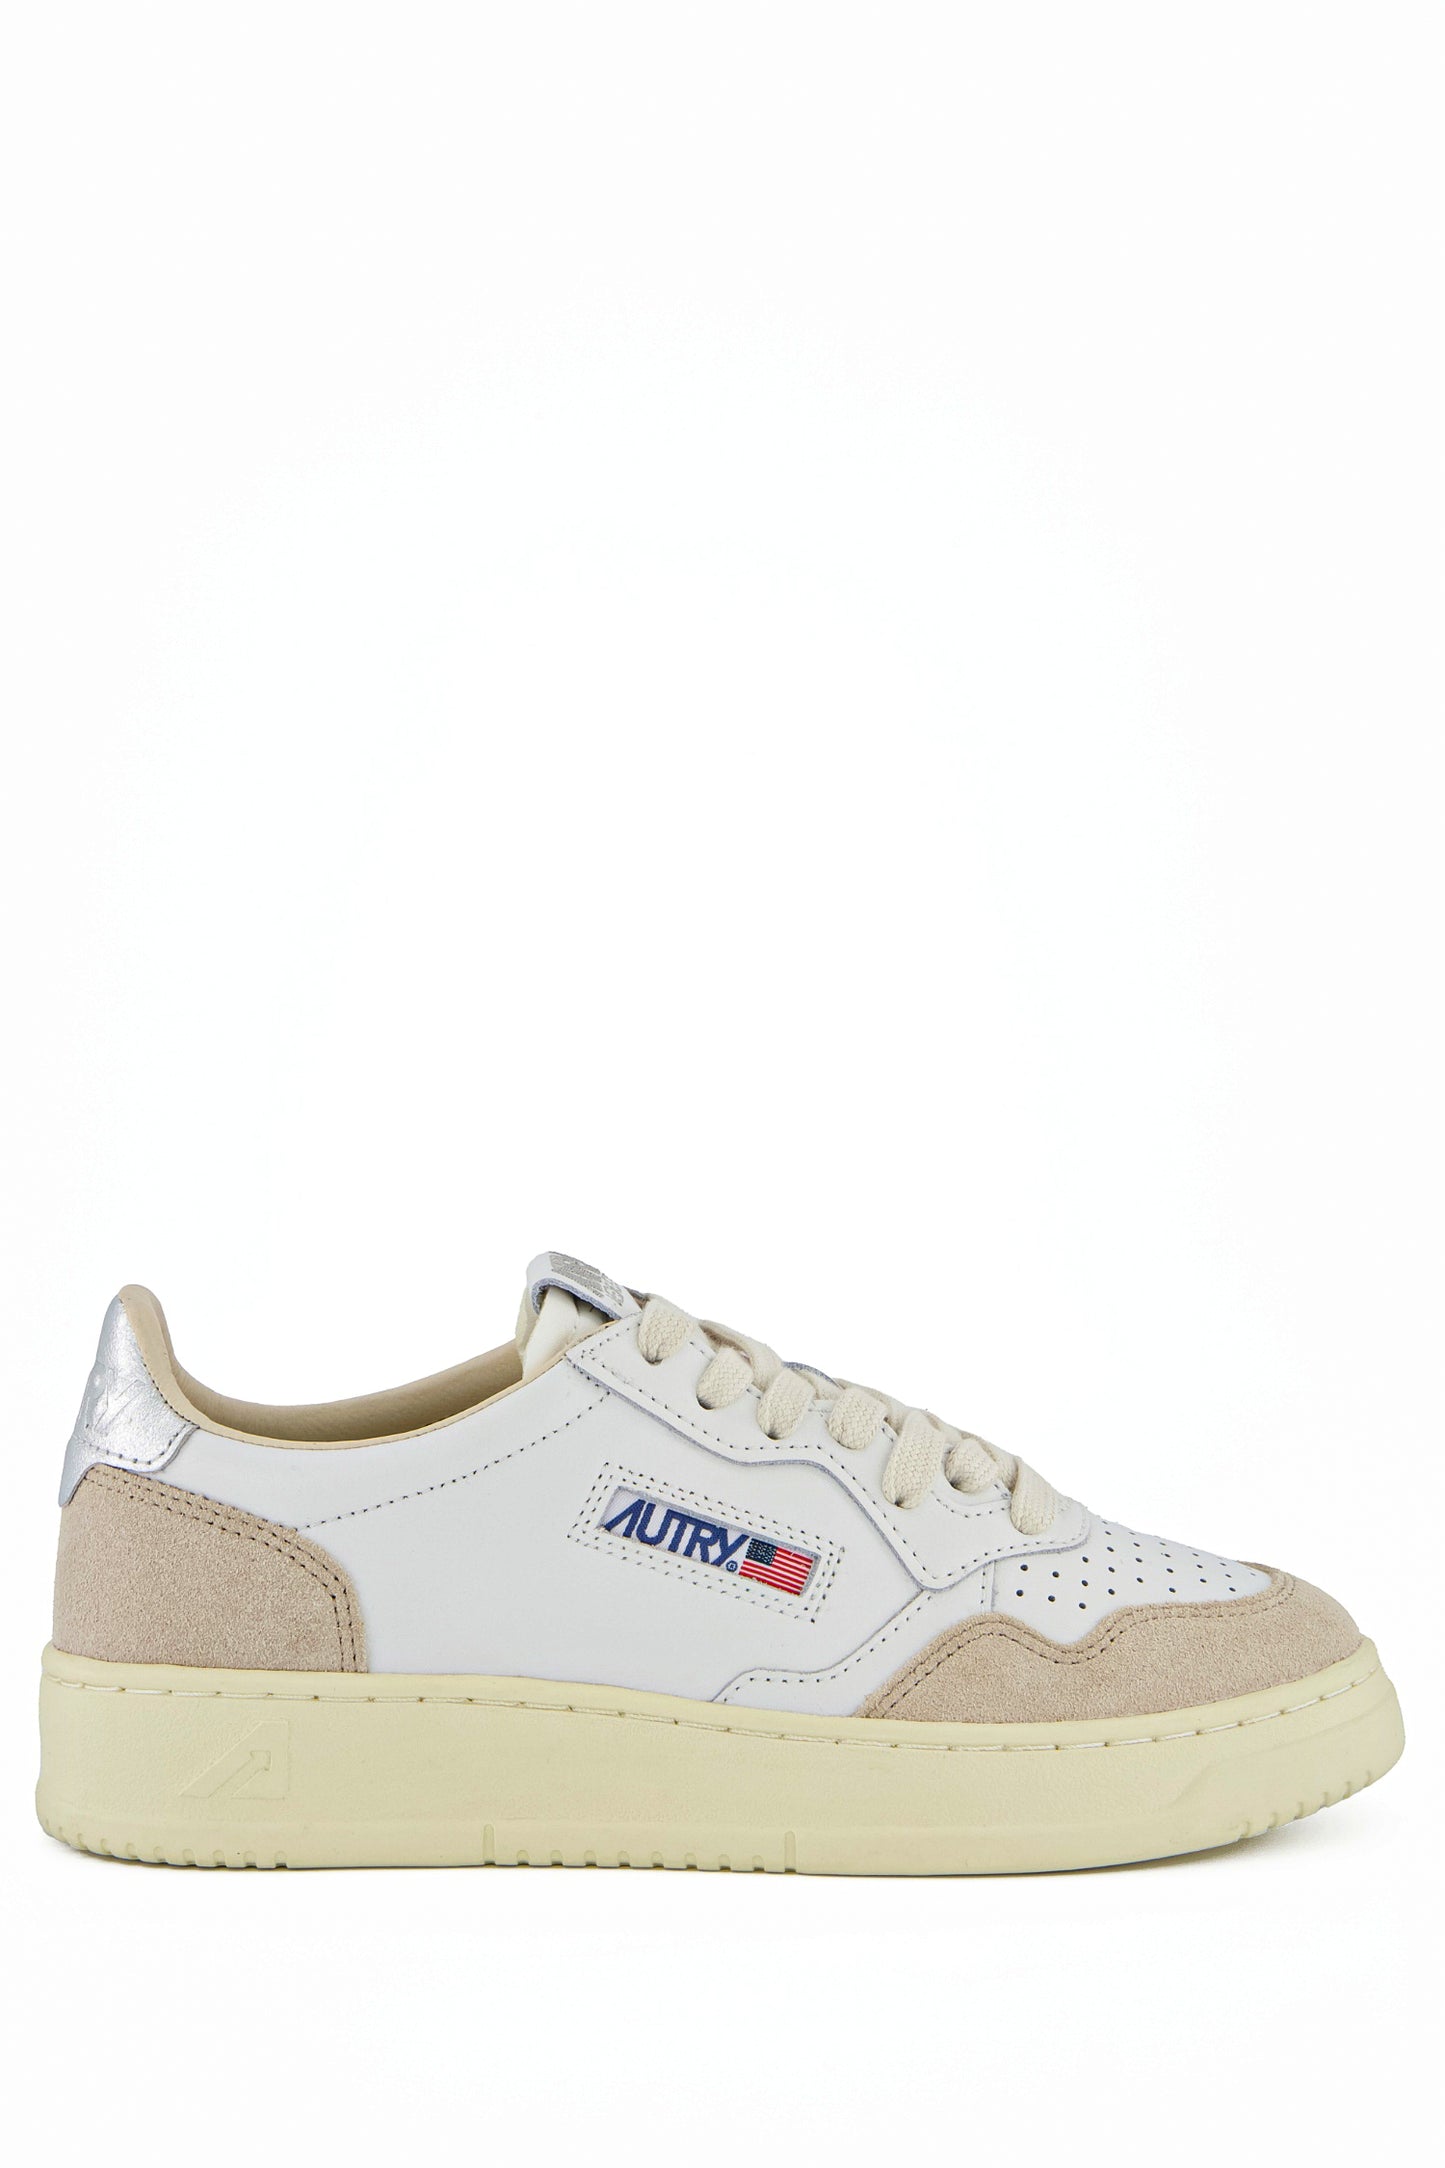 AUTRY MEDALIST LOW LS74 SUEDE/LEATHER WHITE/SILVER